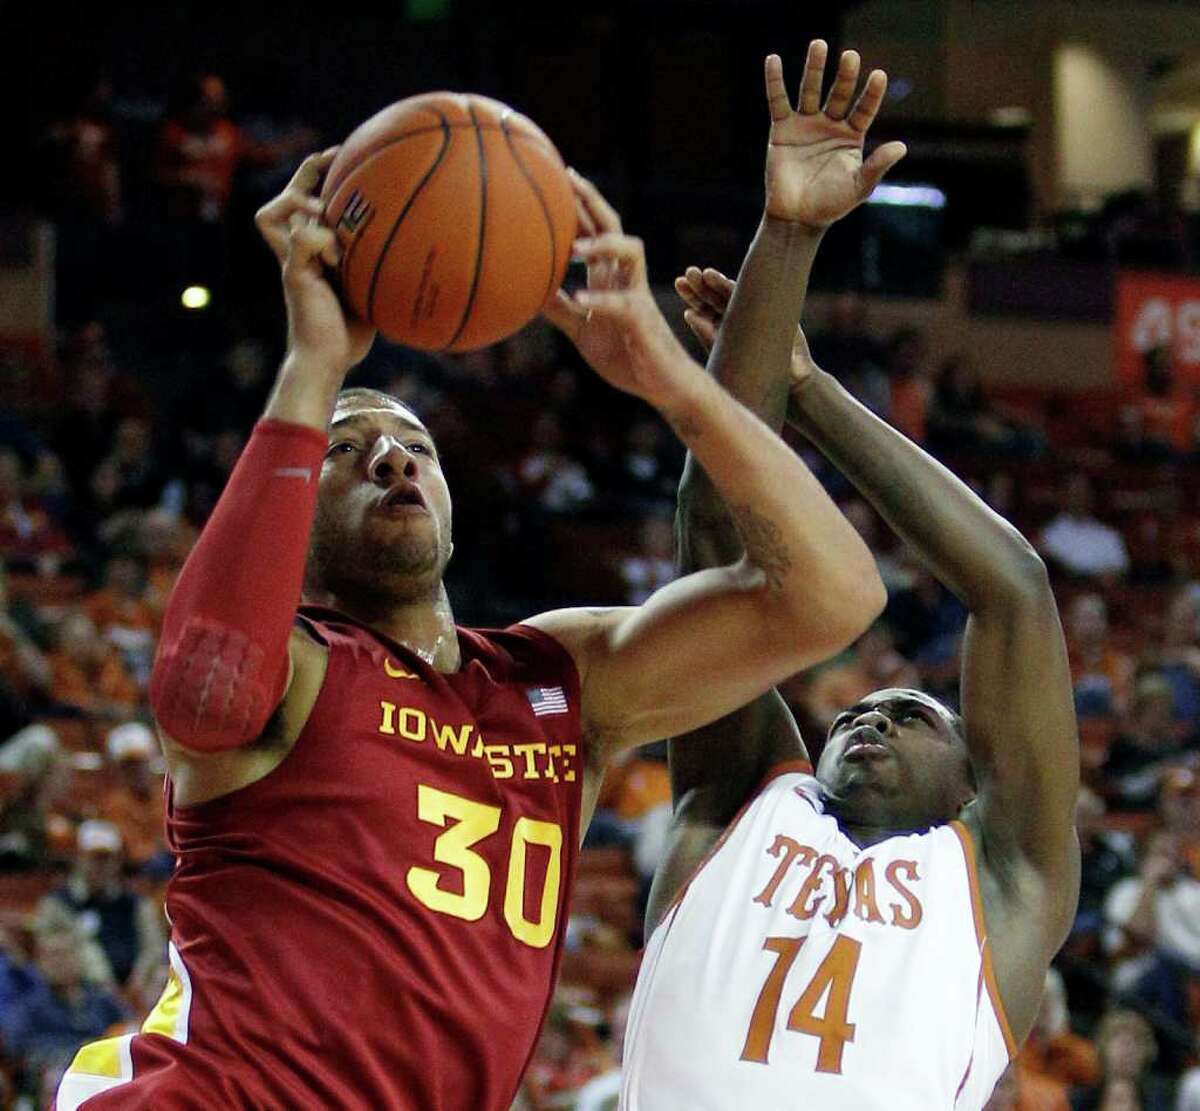 Iowa State's Royce White (30) is defended by Texas' J'Covan Brown (14) during the first half of an NCAA college basketball game, Tuesday, Jan. 24, 2012, in Austin.